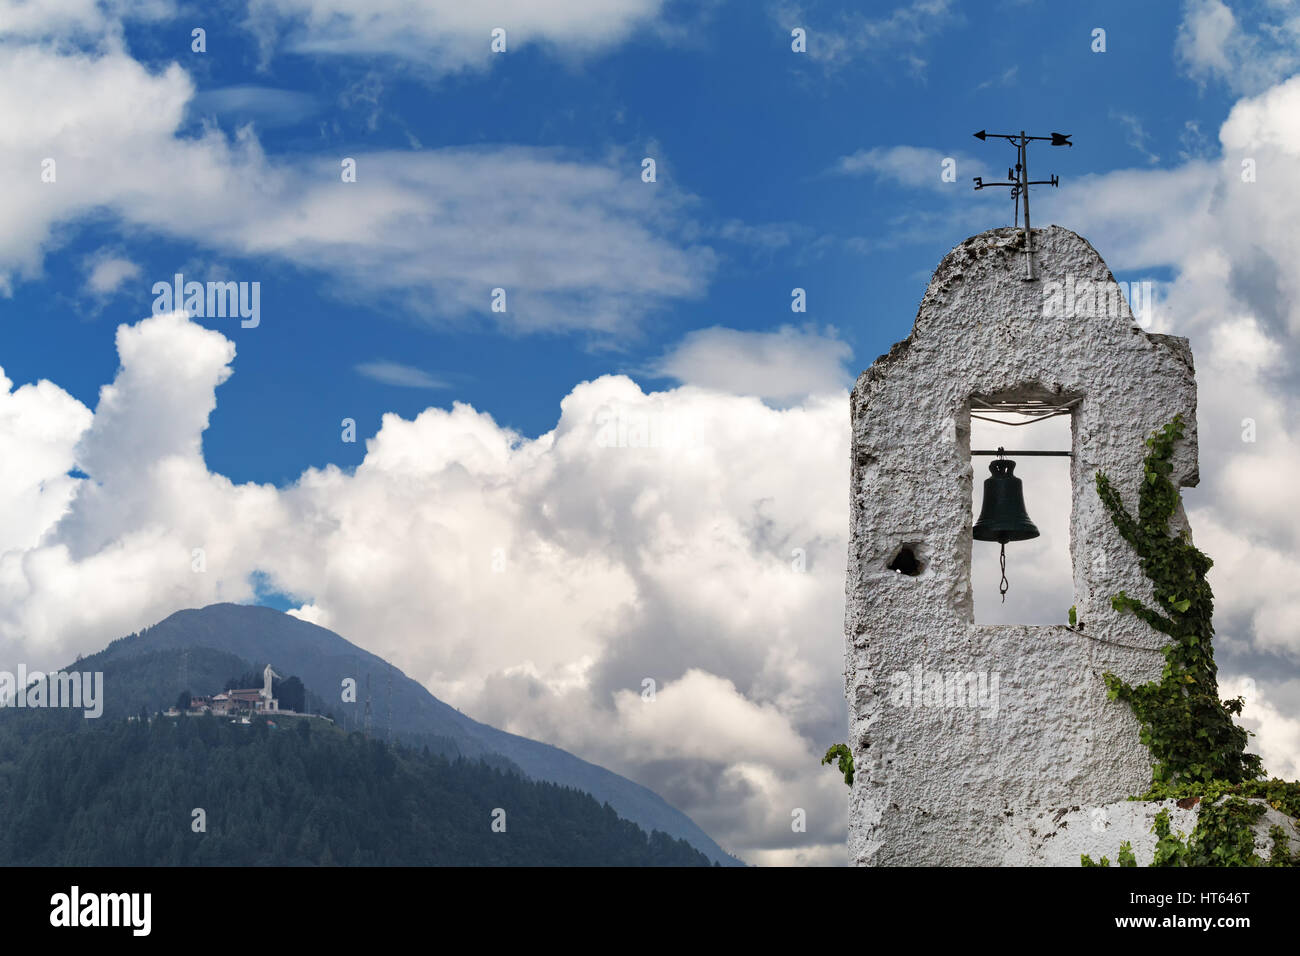 An old bell tower with Cerro de Guadalupe in the background in Bogota, Colombia. Stock Photo